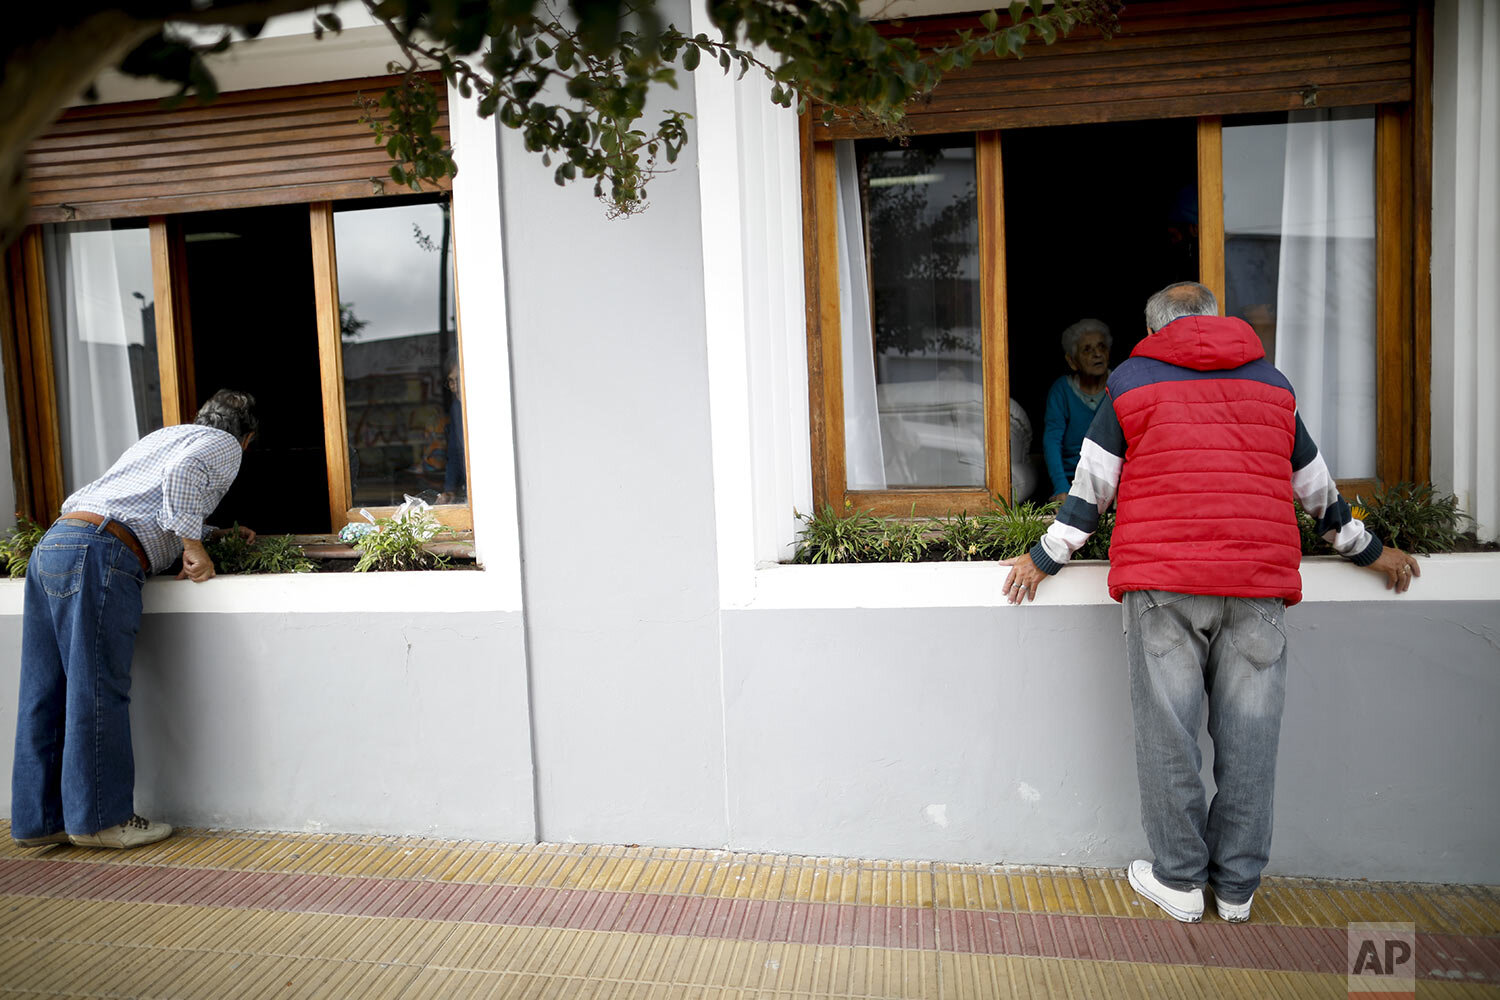  Men visit their mothers living at the Reminiscencias residence for the elderly in Tandil, Argentina, Monday, April 5, 2021. (AP Photo/Natacha Pisarenko) 